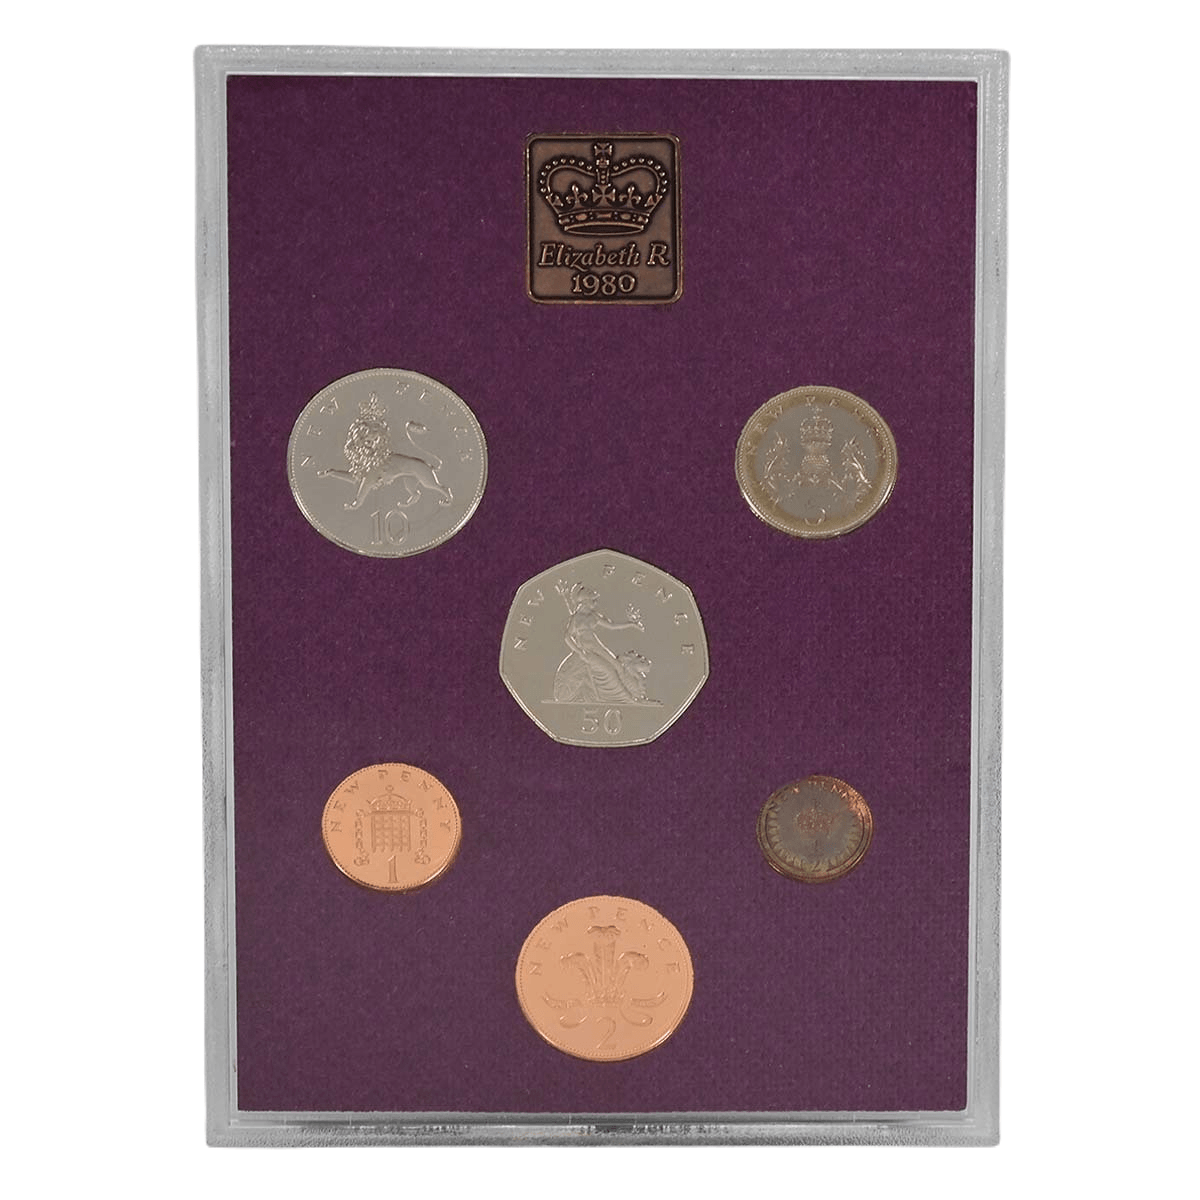 1980 UK Proof Annual 6 Coin Set - Loose Change Coins